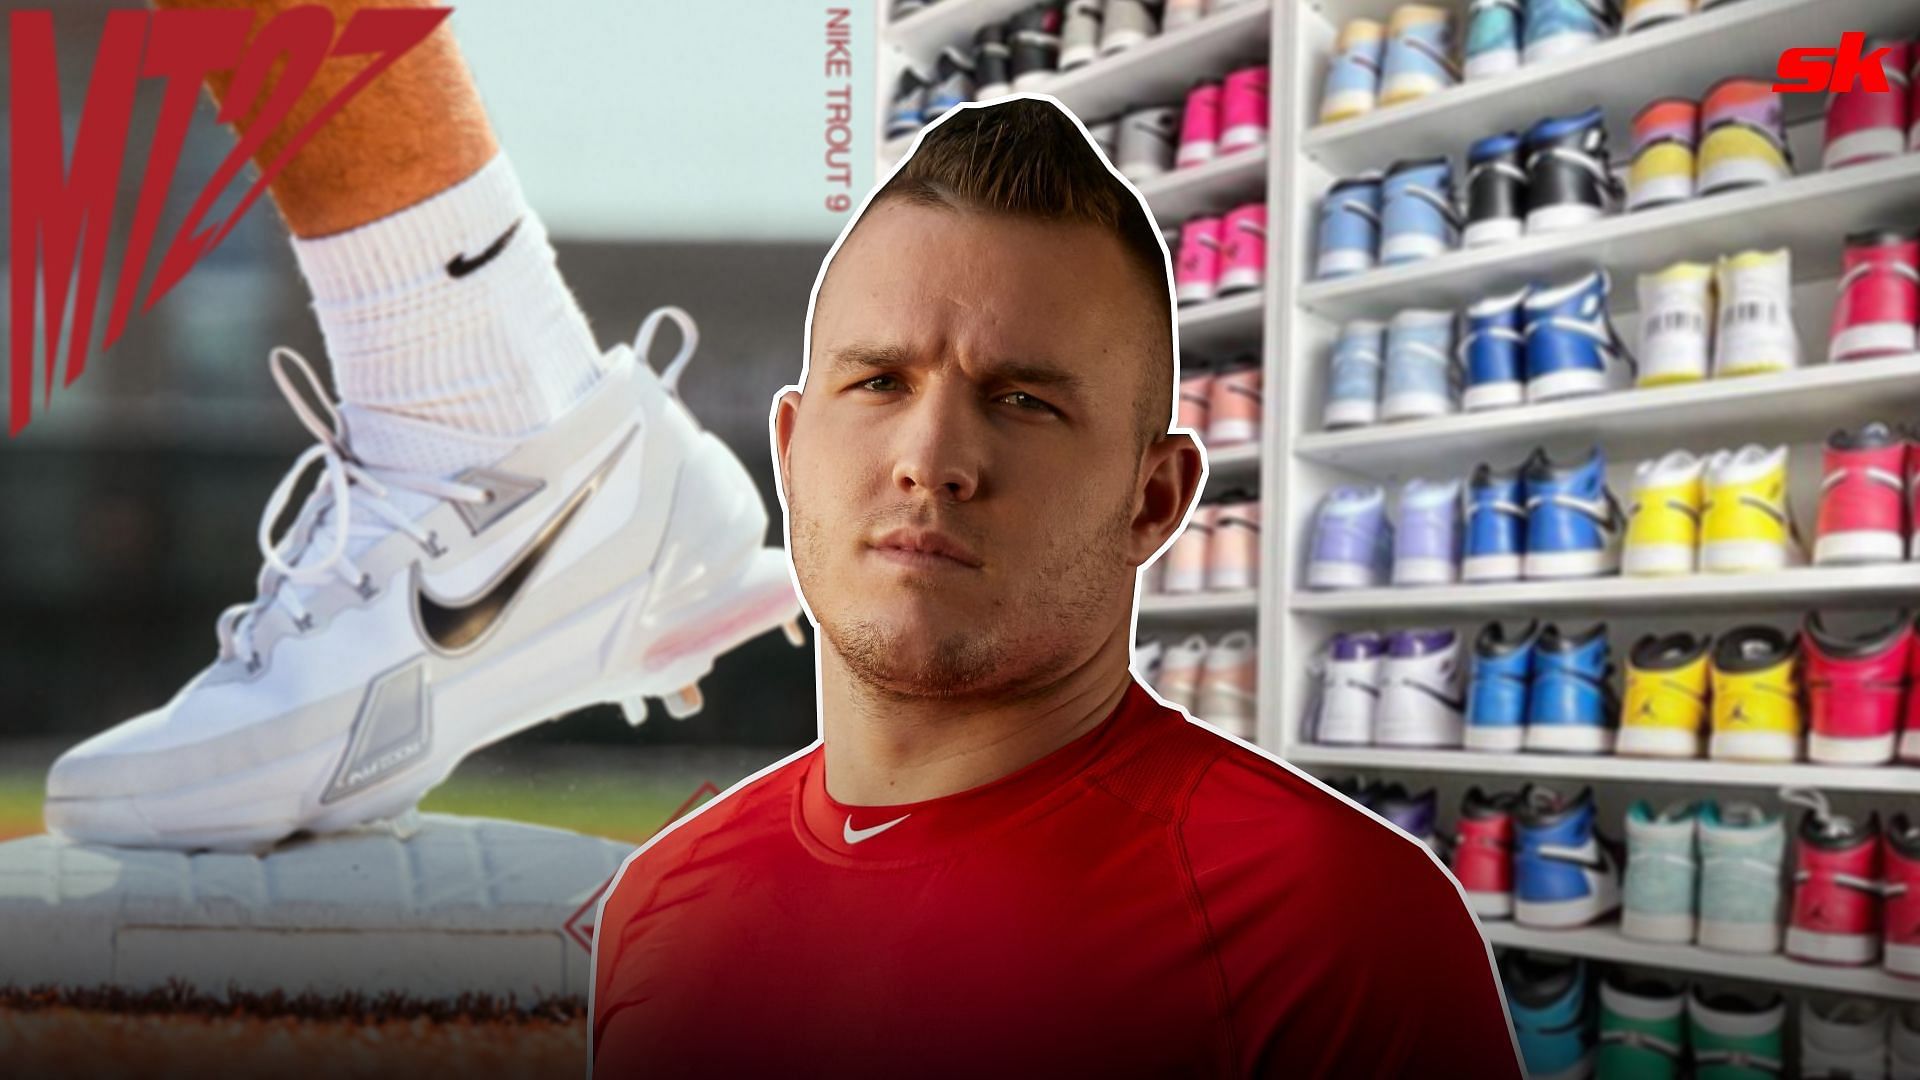 Angels star Mike Trout has long relied on Nike cleats